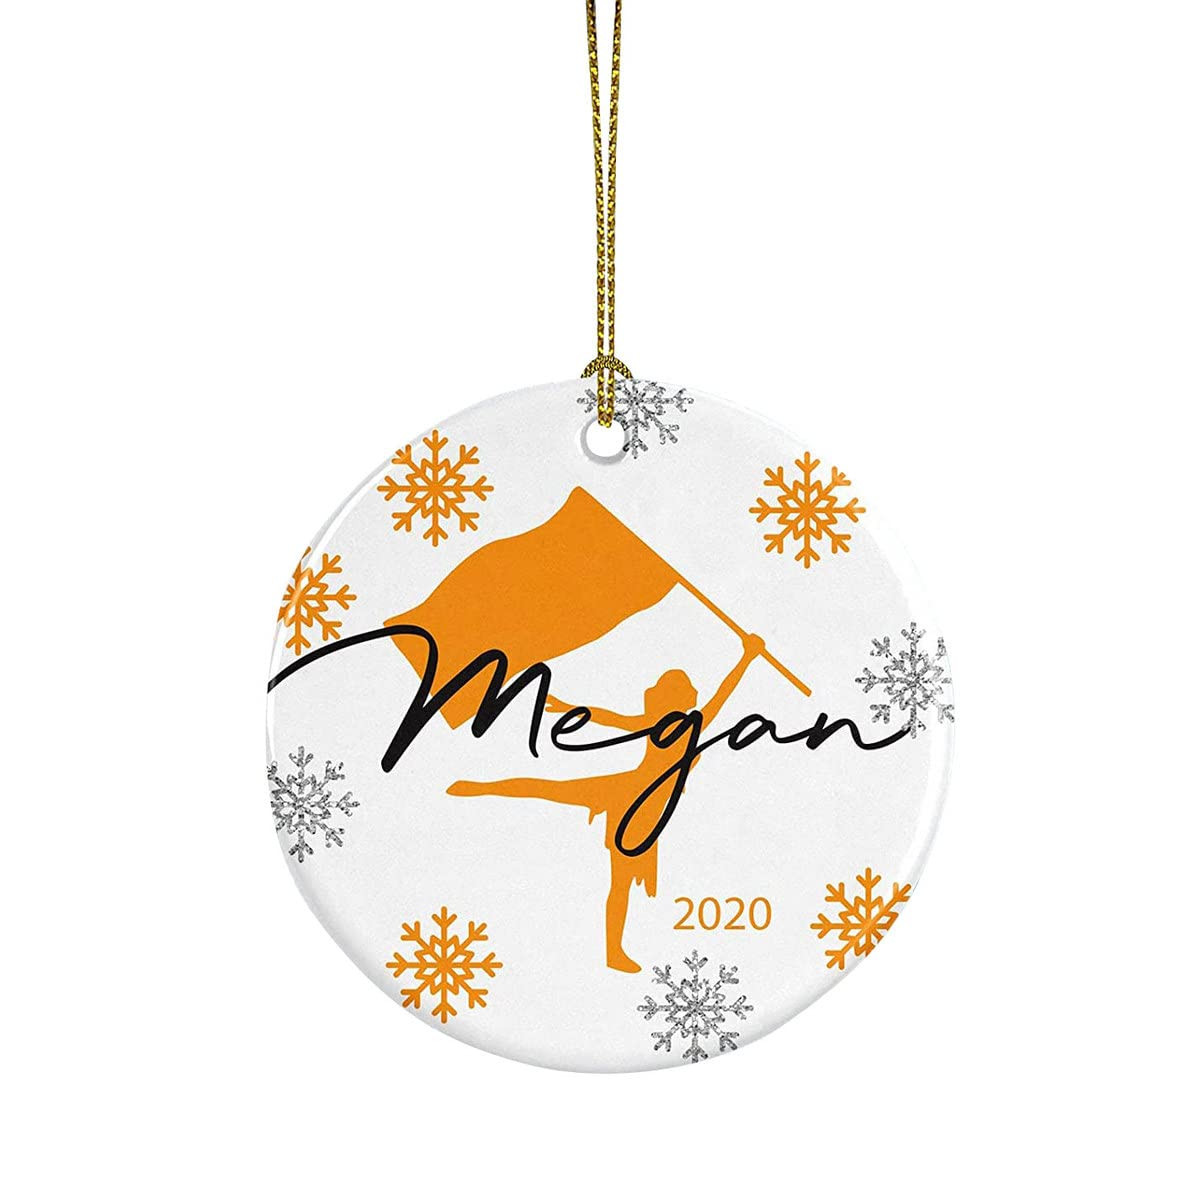 Zakina Personalized Color Guard Ornament Color Guard Design Gifts For Majorettes And Drill Team Christmas Ornament Hanging Decoration Christmas Tree Ornament